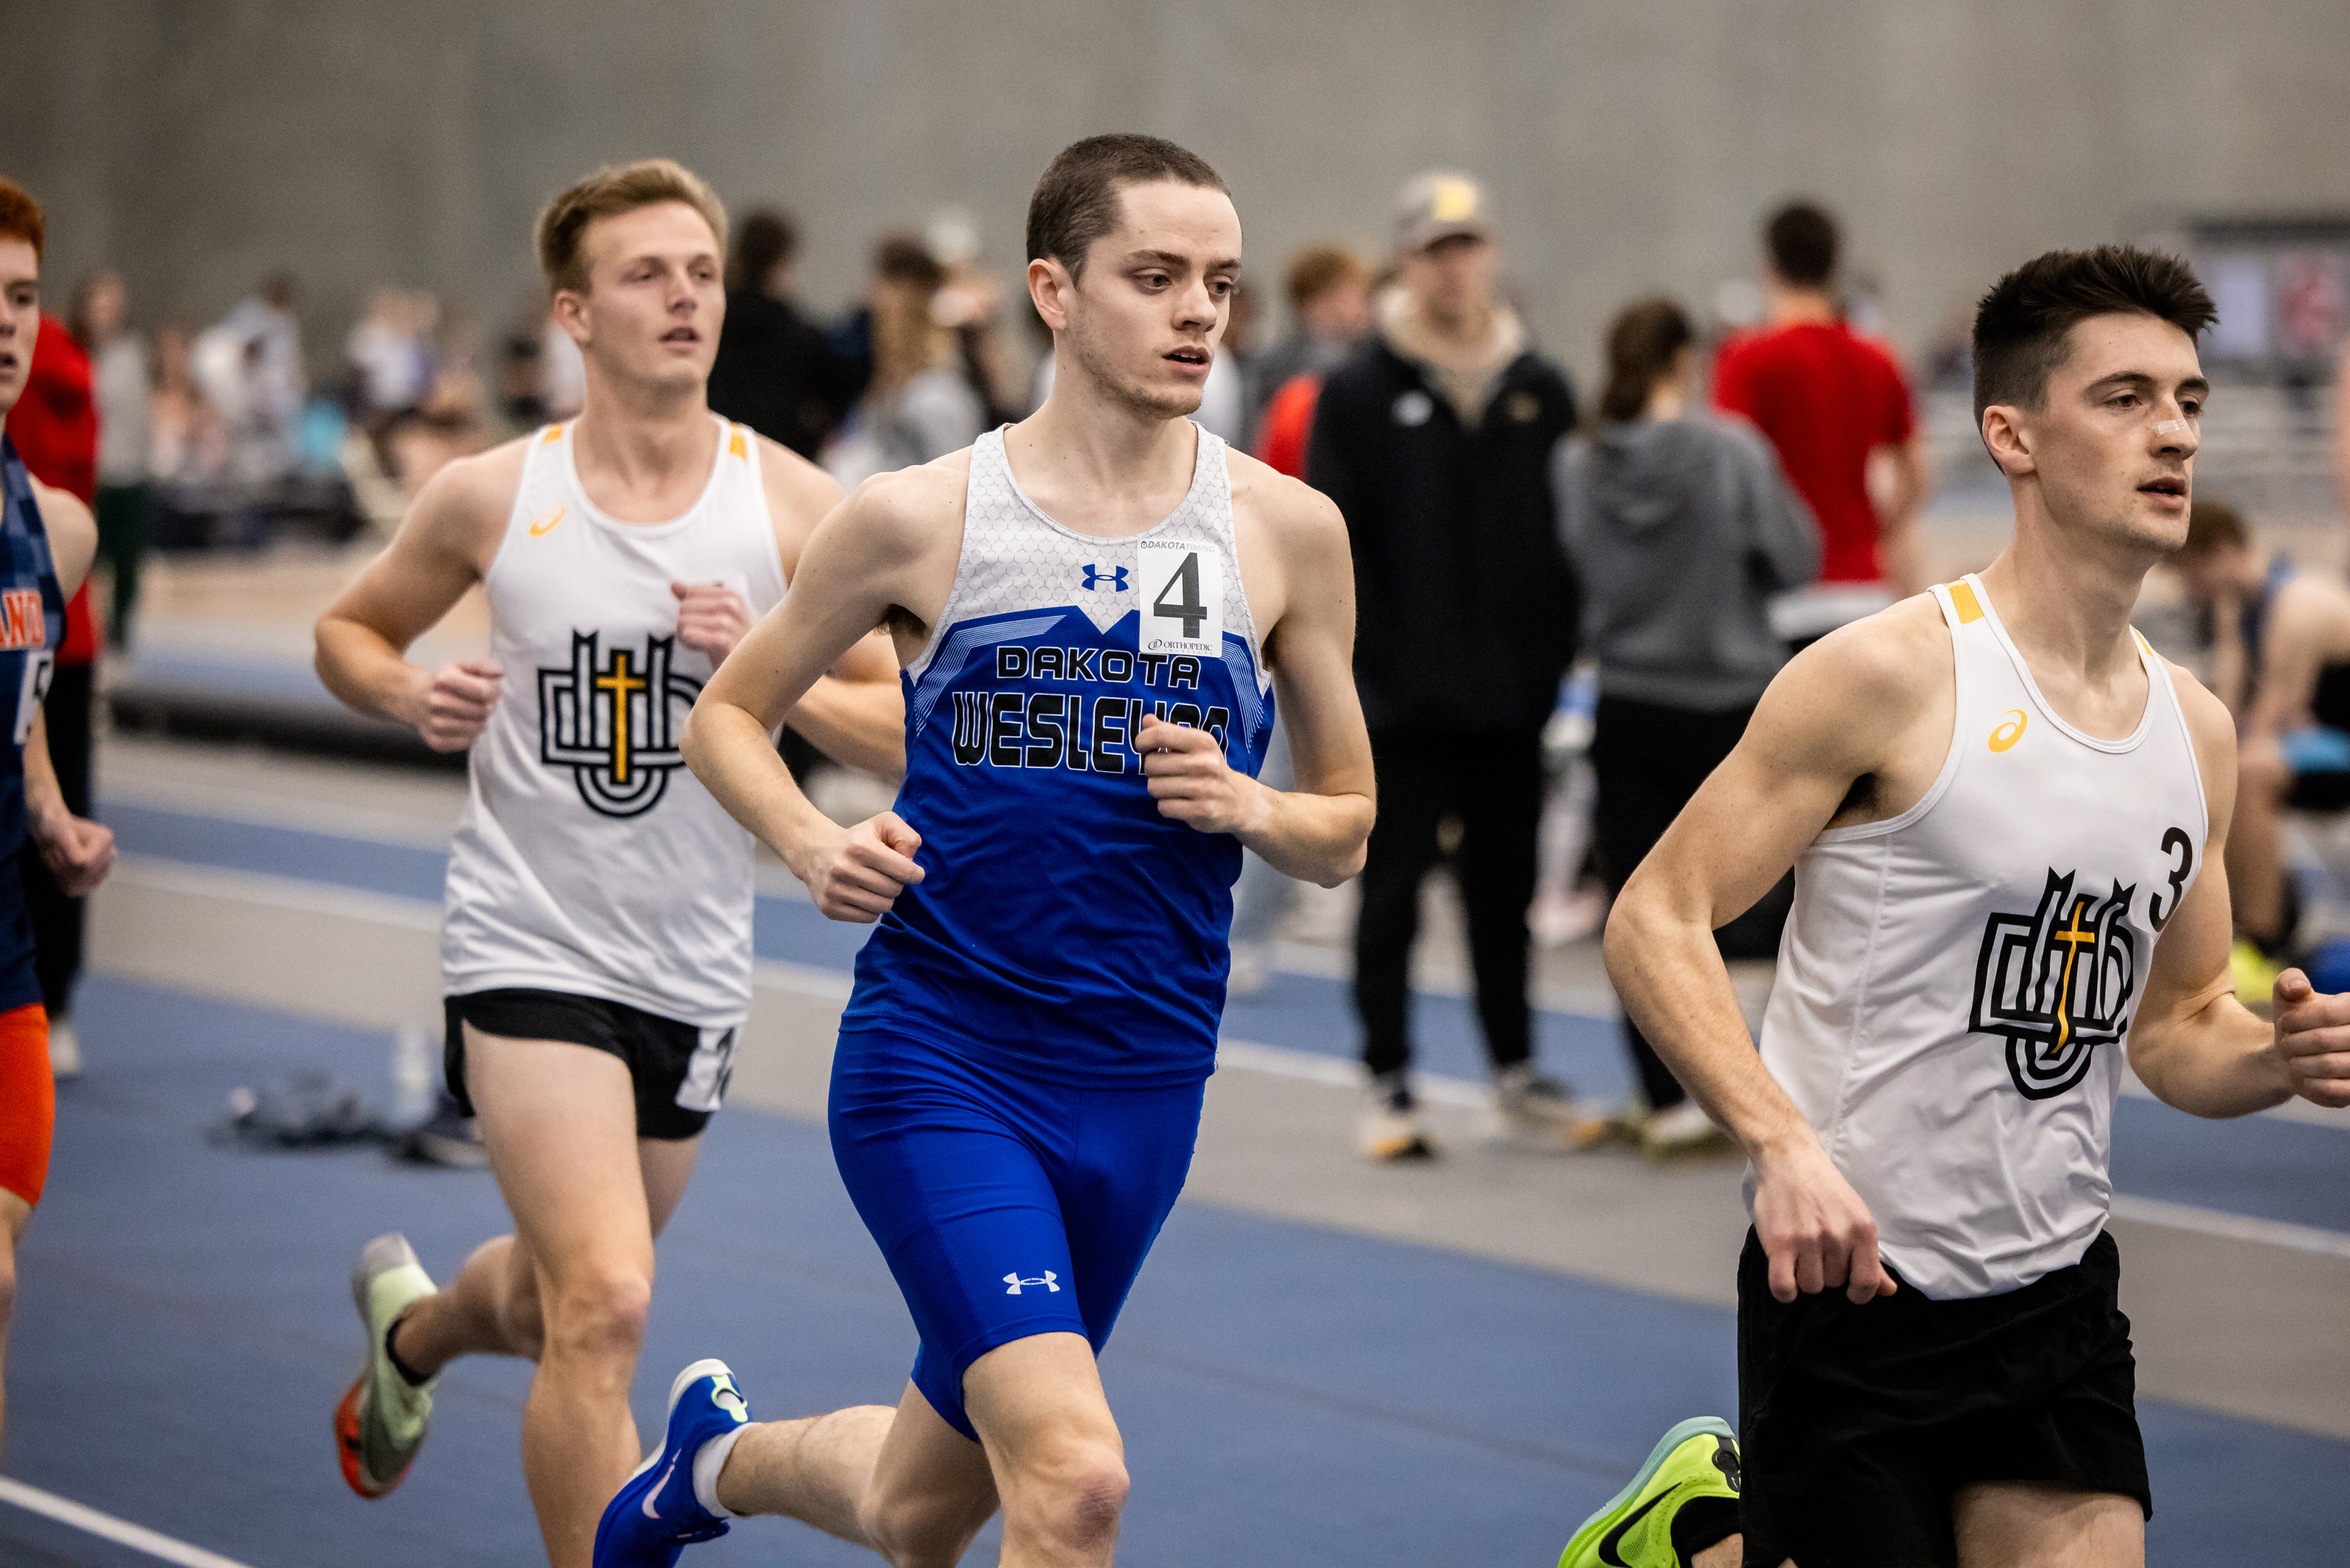 SDSU INDOOR CLASSIC RECAP: SEVERAL TIGERS HIT NEW PERSONAL BESTS ON DAY ONE